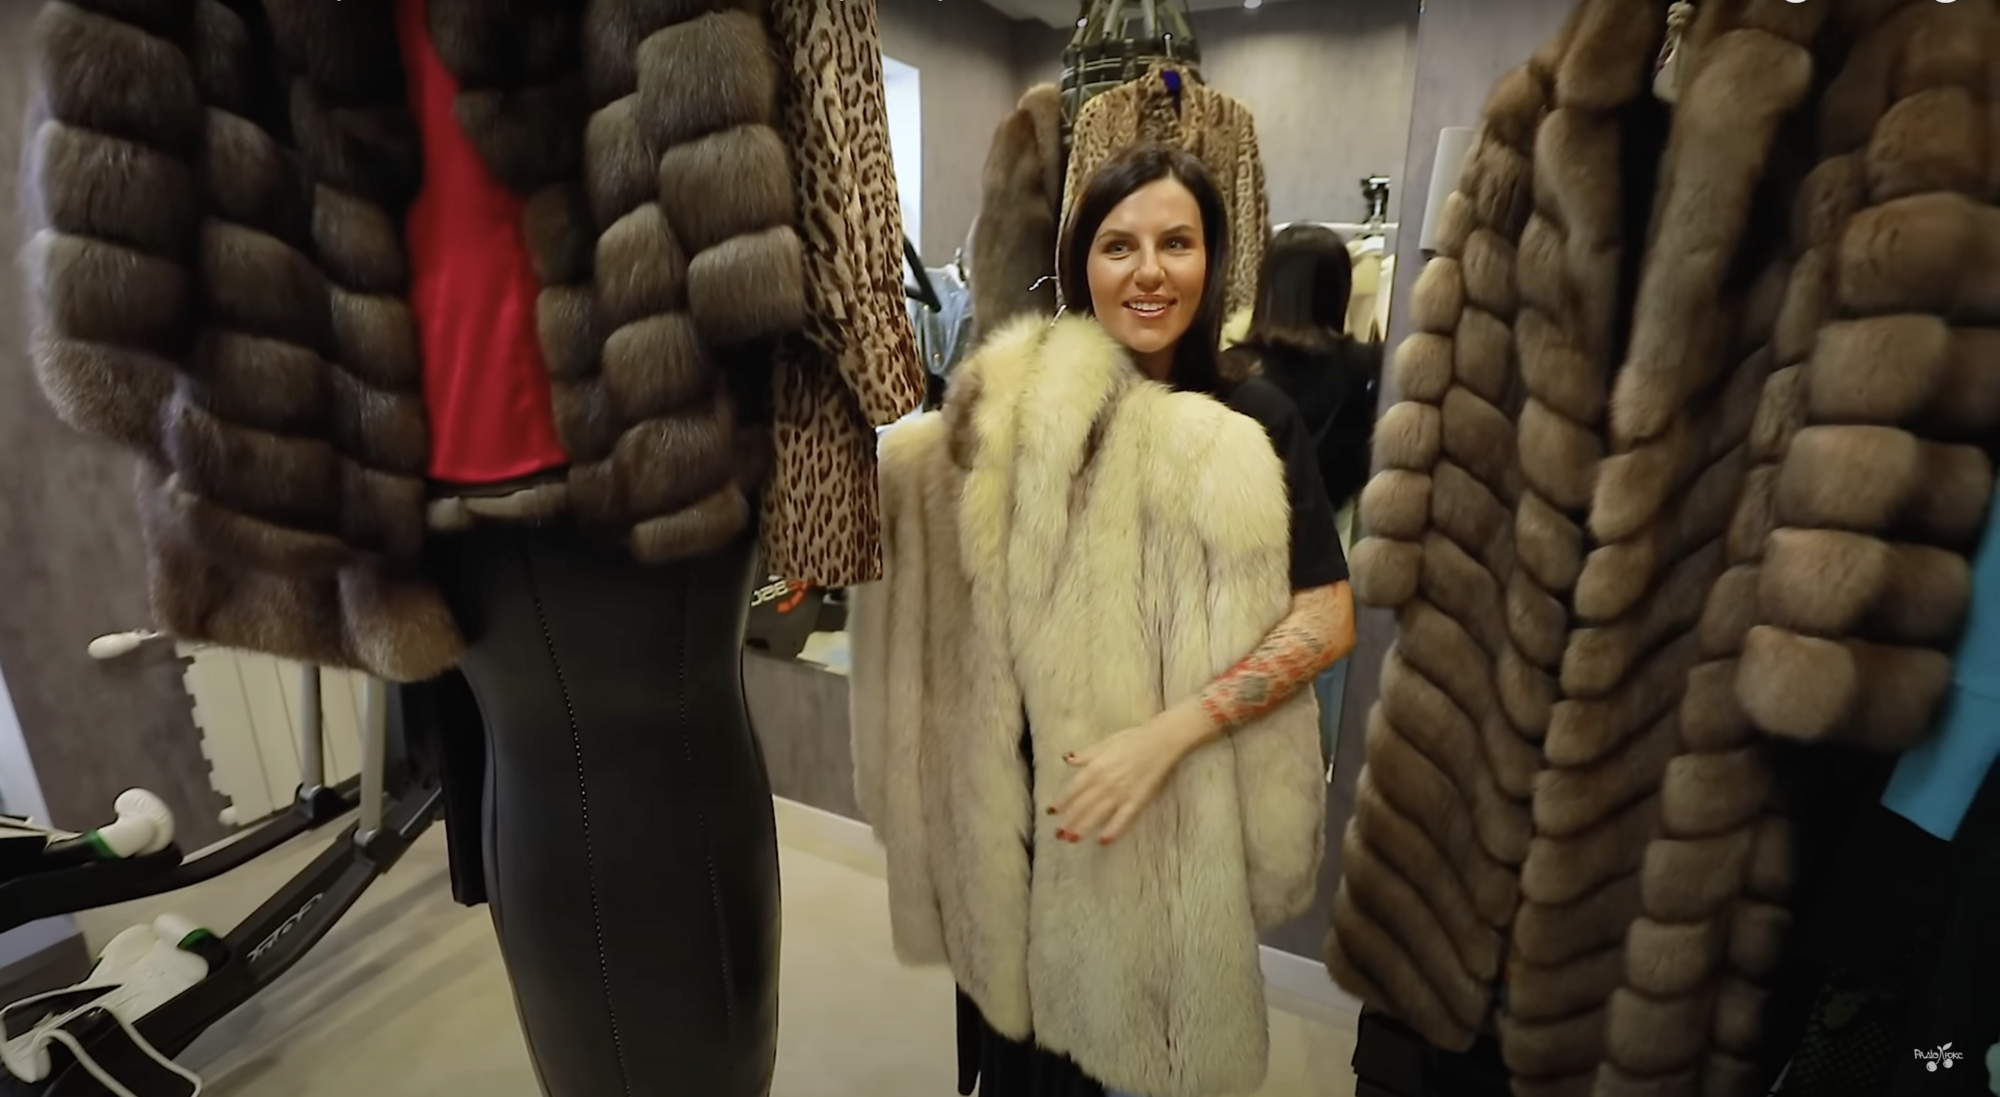 Blogger Alkhim, who humiliated Ukrainians, showed her collection of fur coats and the most expensive thing in her closet - a jacket for 5 thousand euros